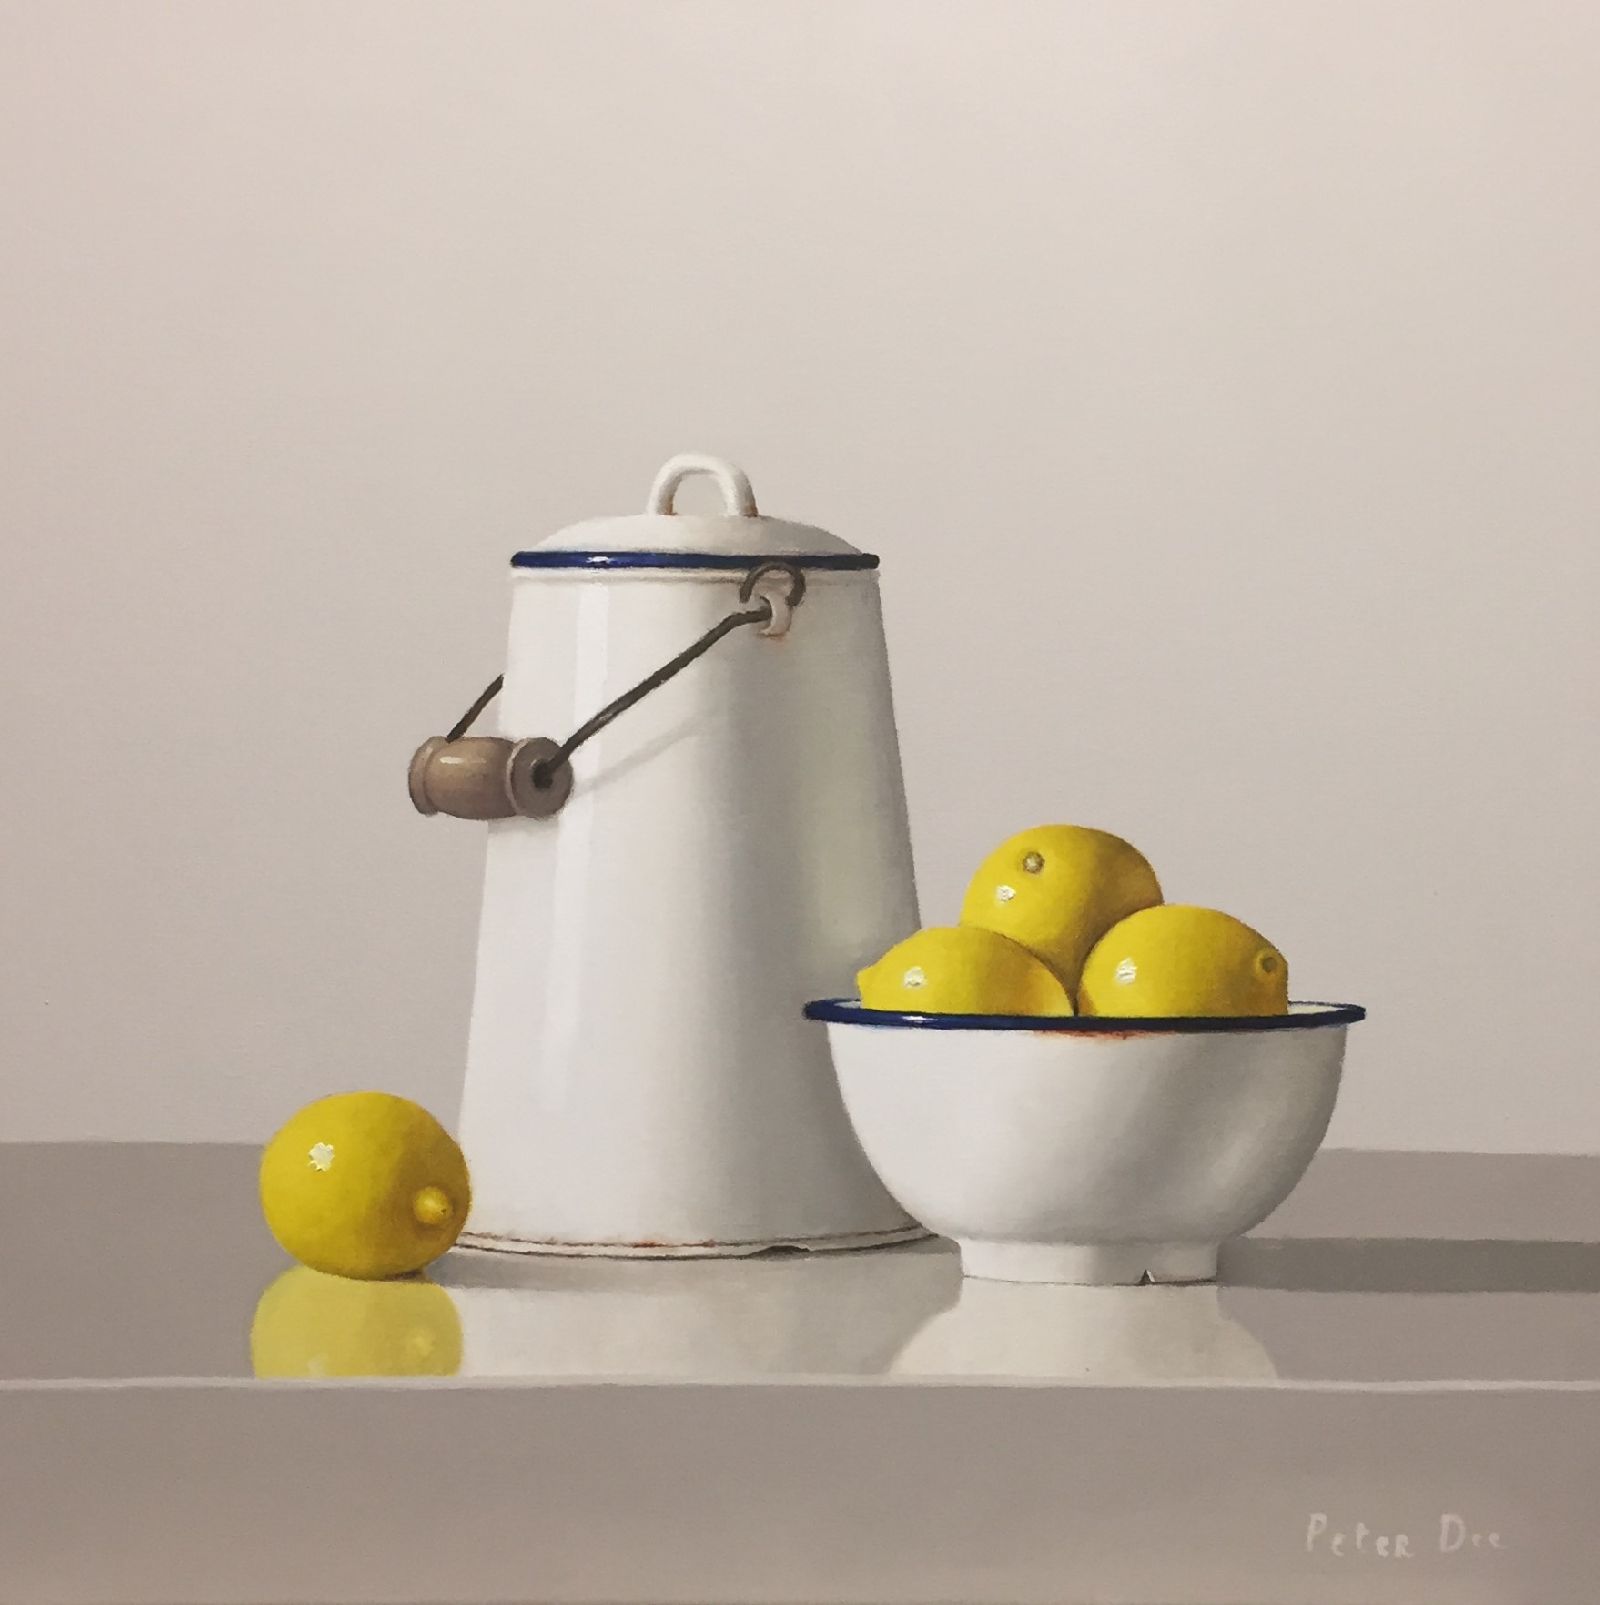 Still Life with Lemons by Peter Dee